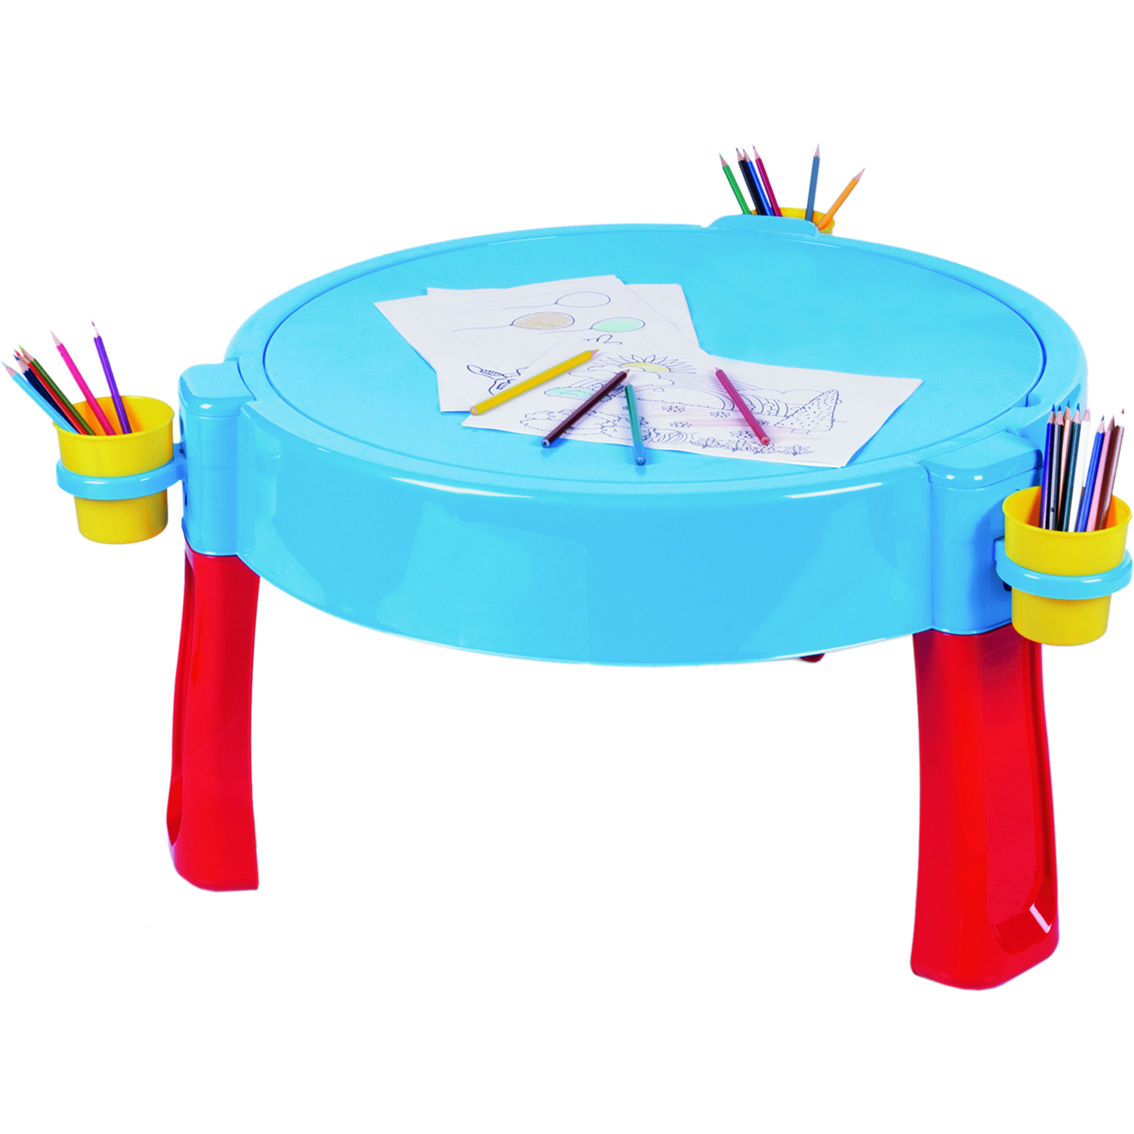 Dolu Toys 3-in-1 Ultimate Water and Sand Activity Table - Image 4 of 5